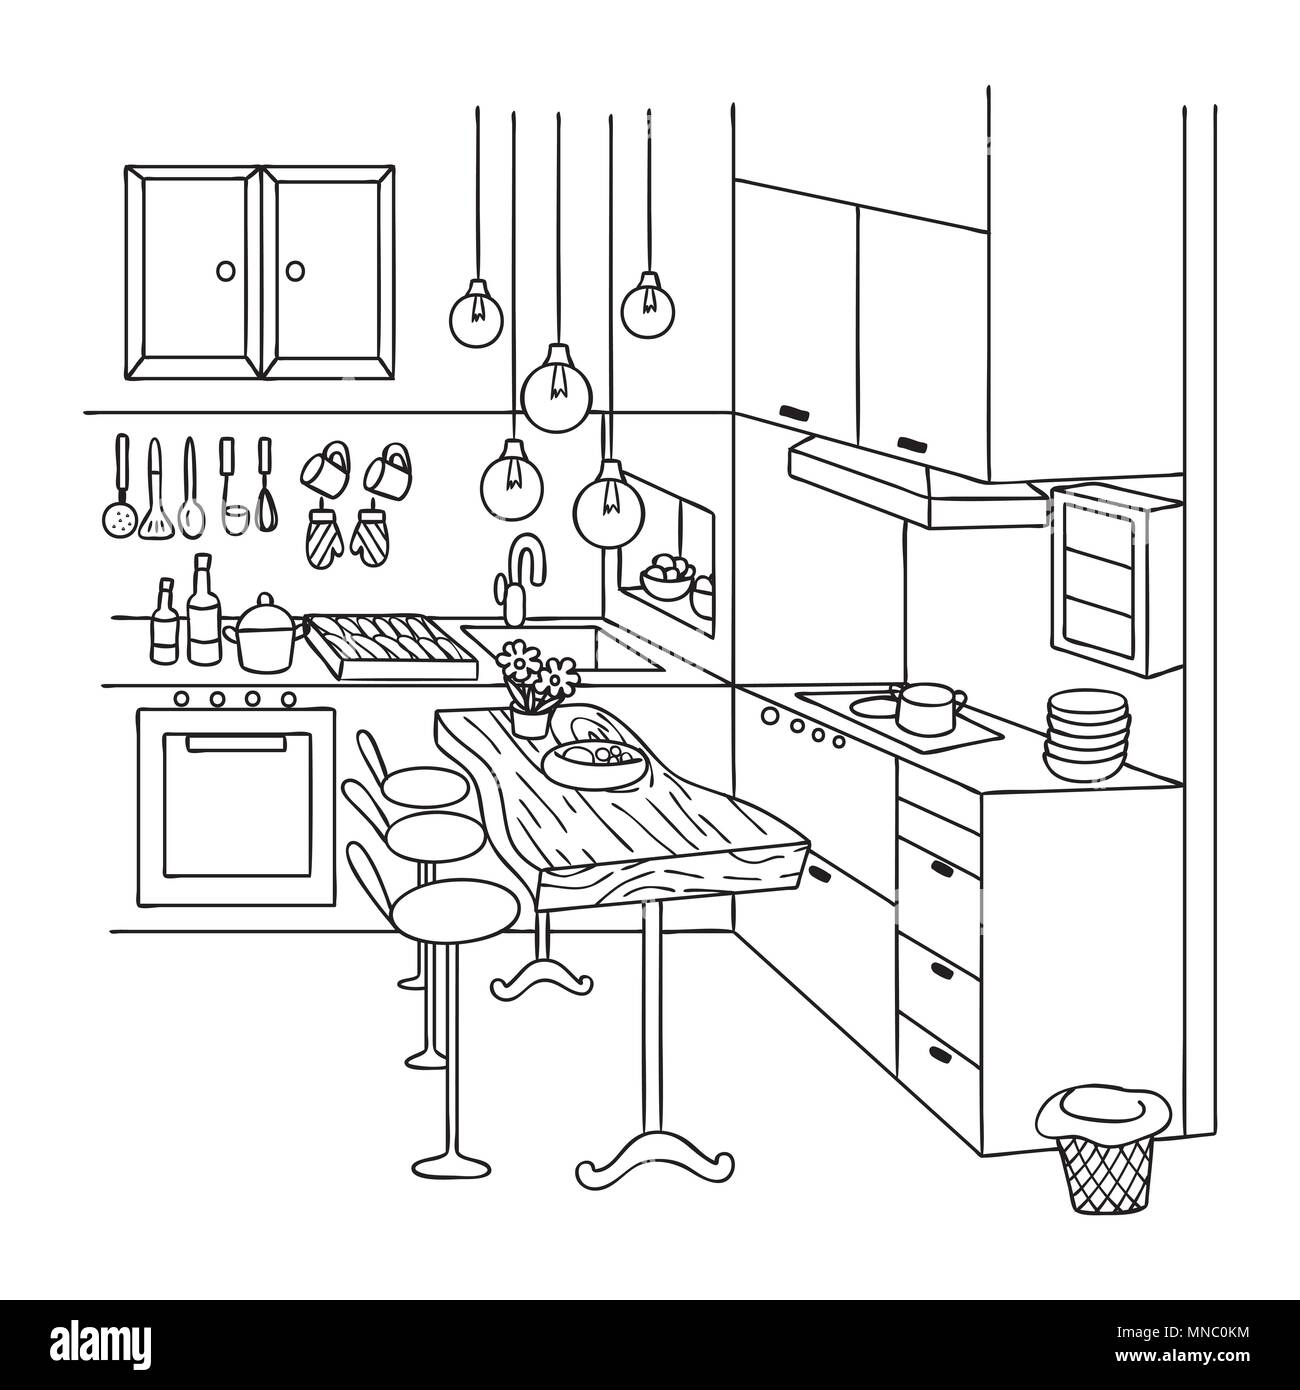 Hand Drawn Of Cute Interior Kitchen For Design Element And Coloring Book Pagevector Illustration MNC0KM 